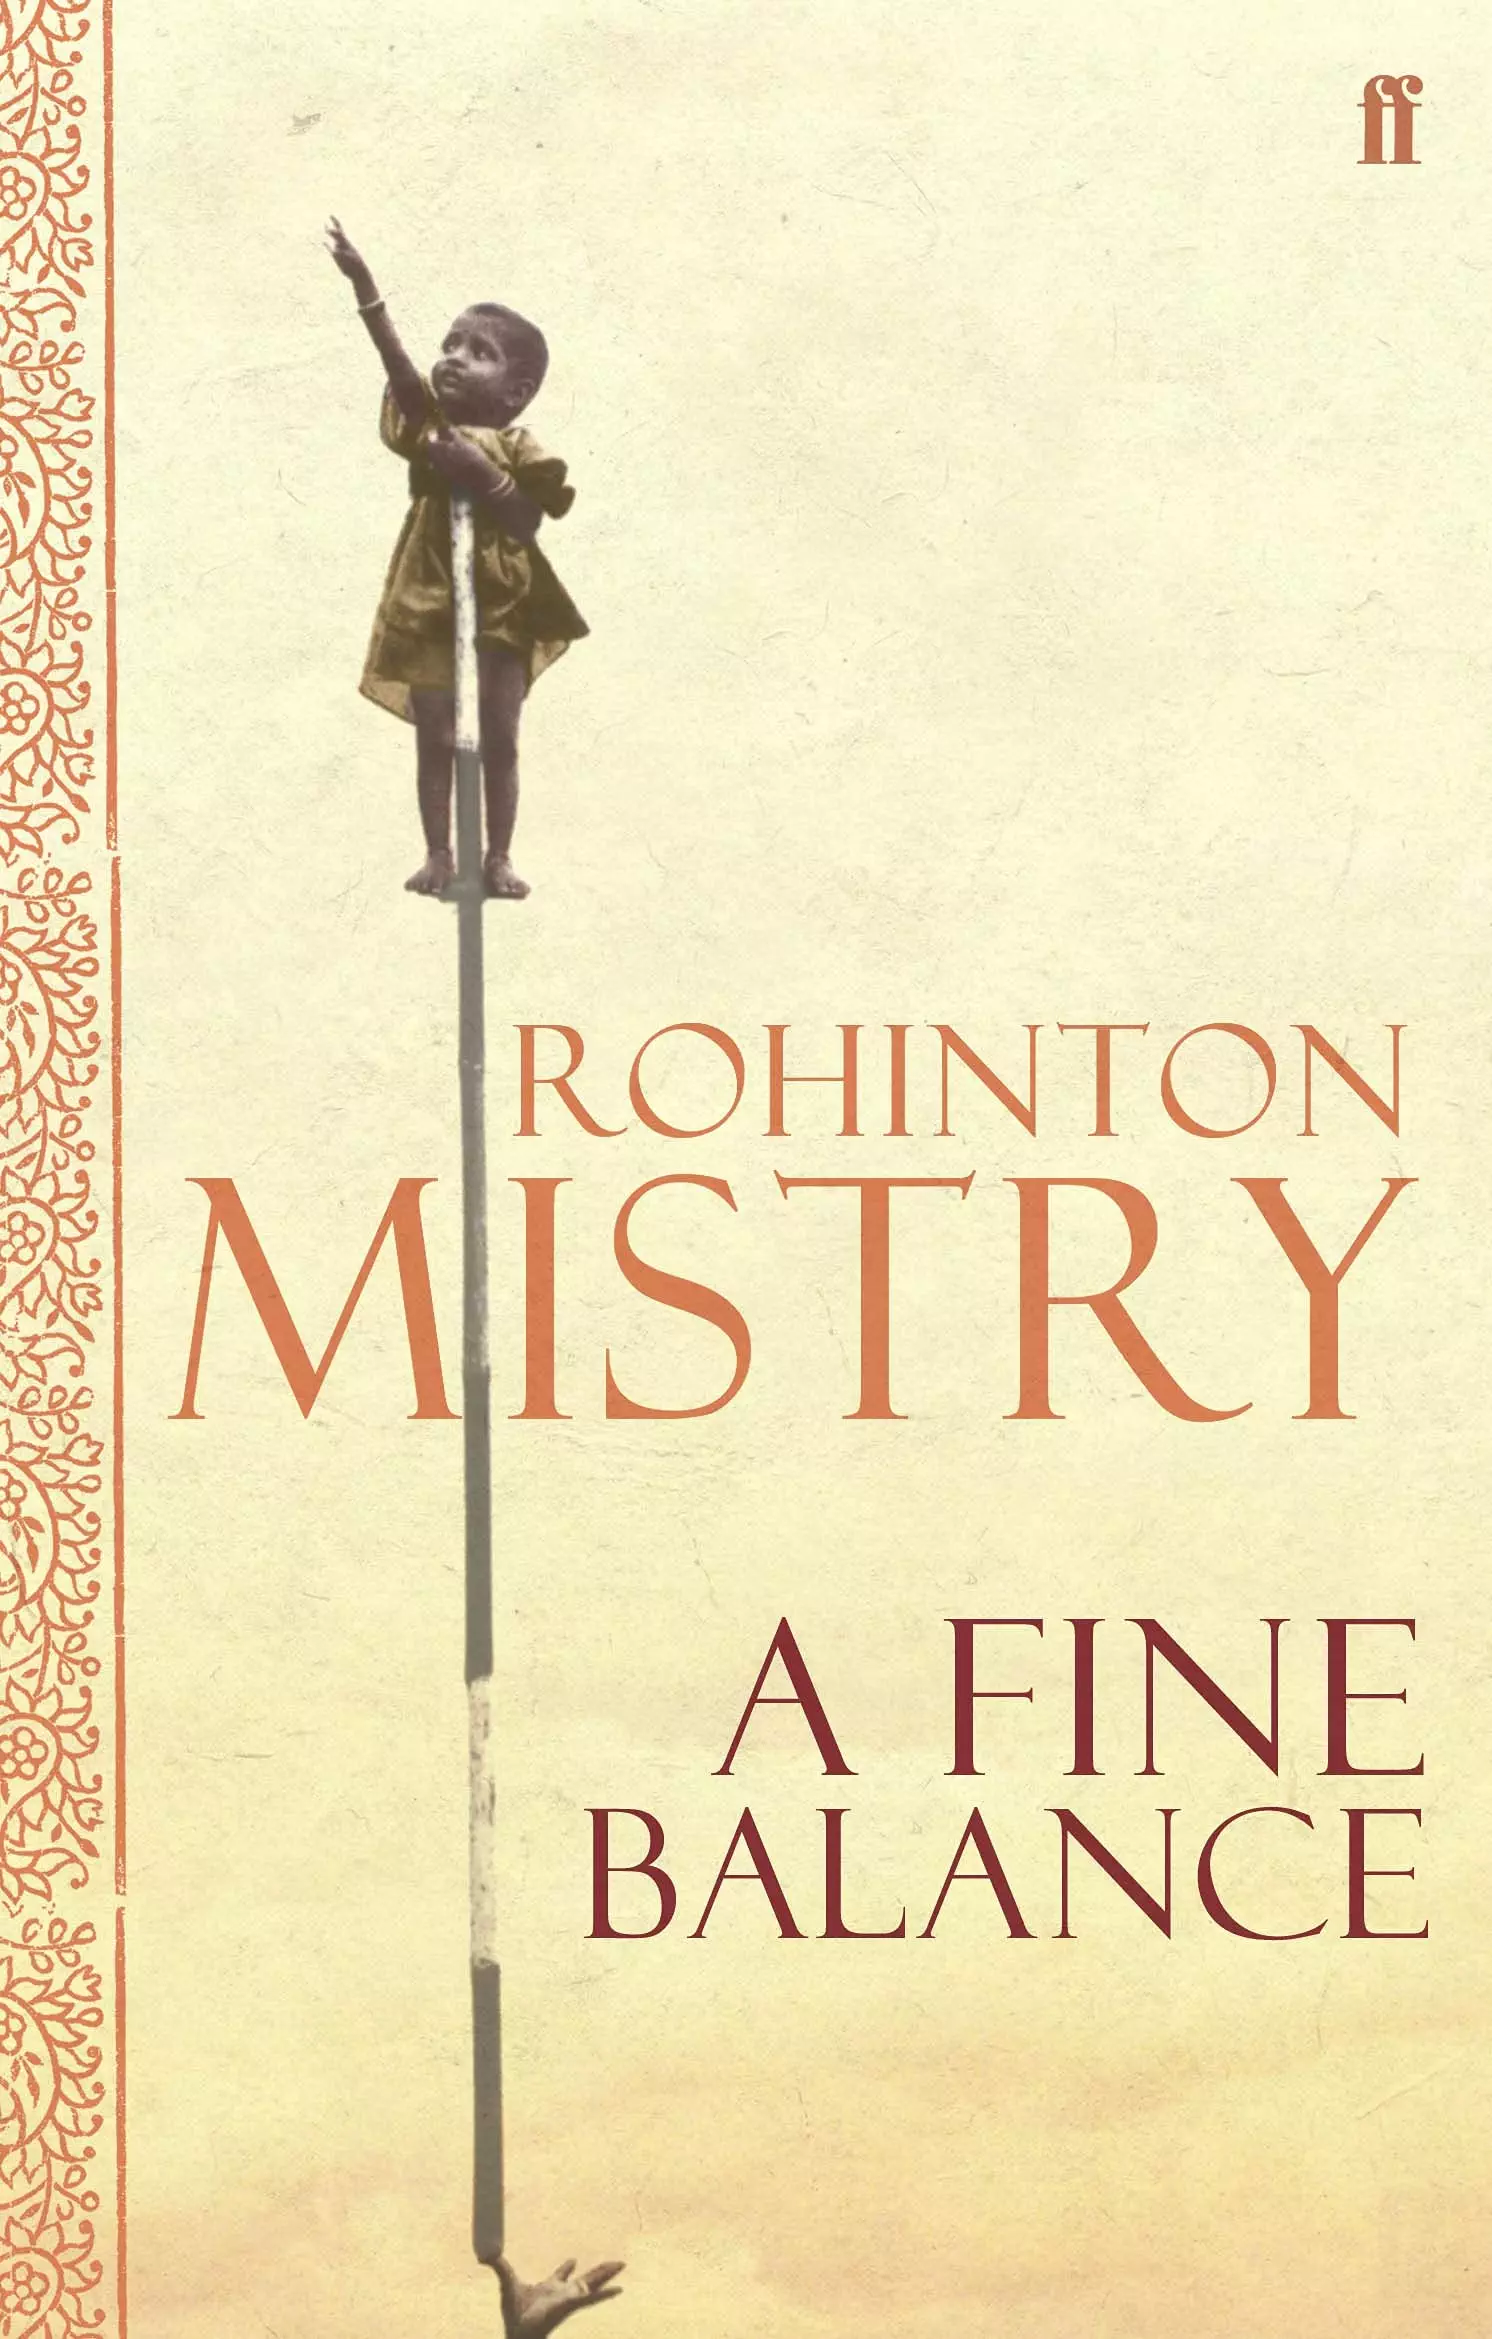 Buy A Fine Balance: The epic modern classic Book Online at Low Prices in  India | A Fine Balance: The epic modern classic Reviews & Ratings -  Amazon.in